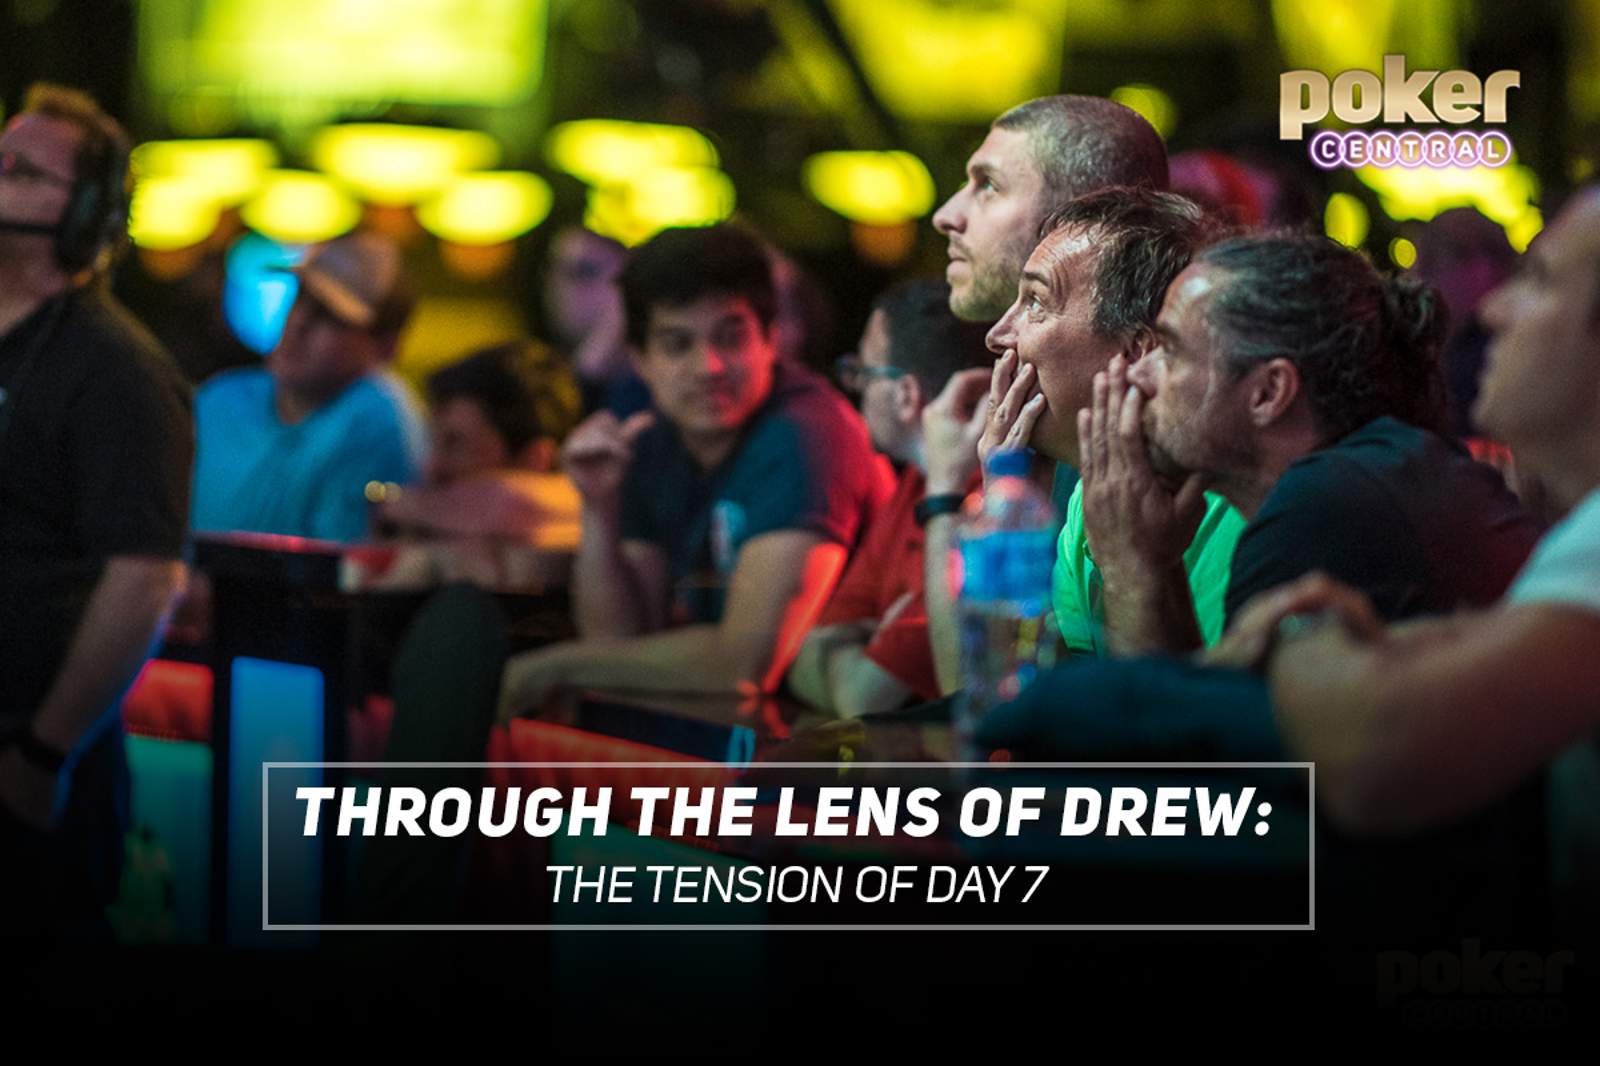 Through The Lens of Drew - The Tension of Day 7